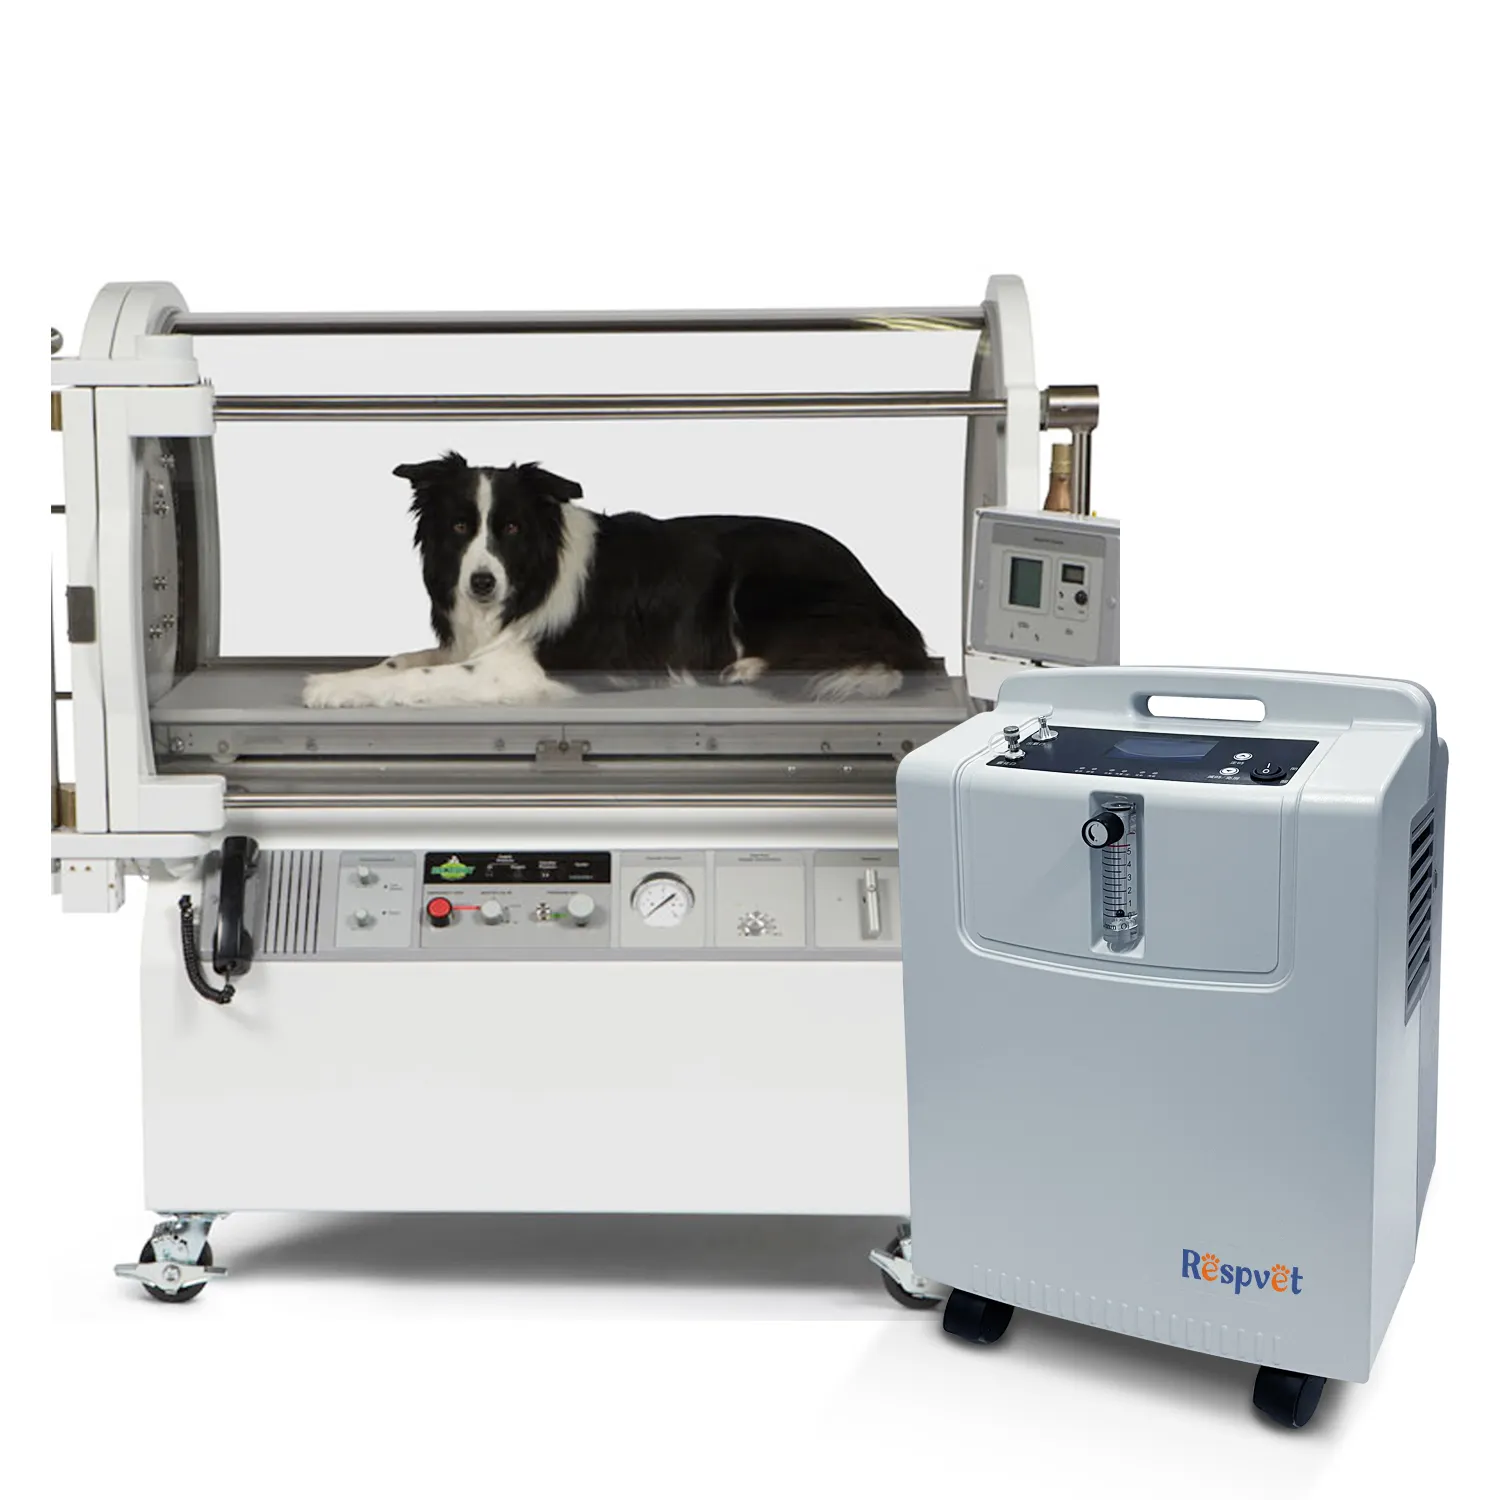 Efficient 5L animal oxygen concentrator comfortable breathing experience for small pets can be equipped with anesthesia machine